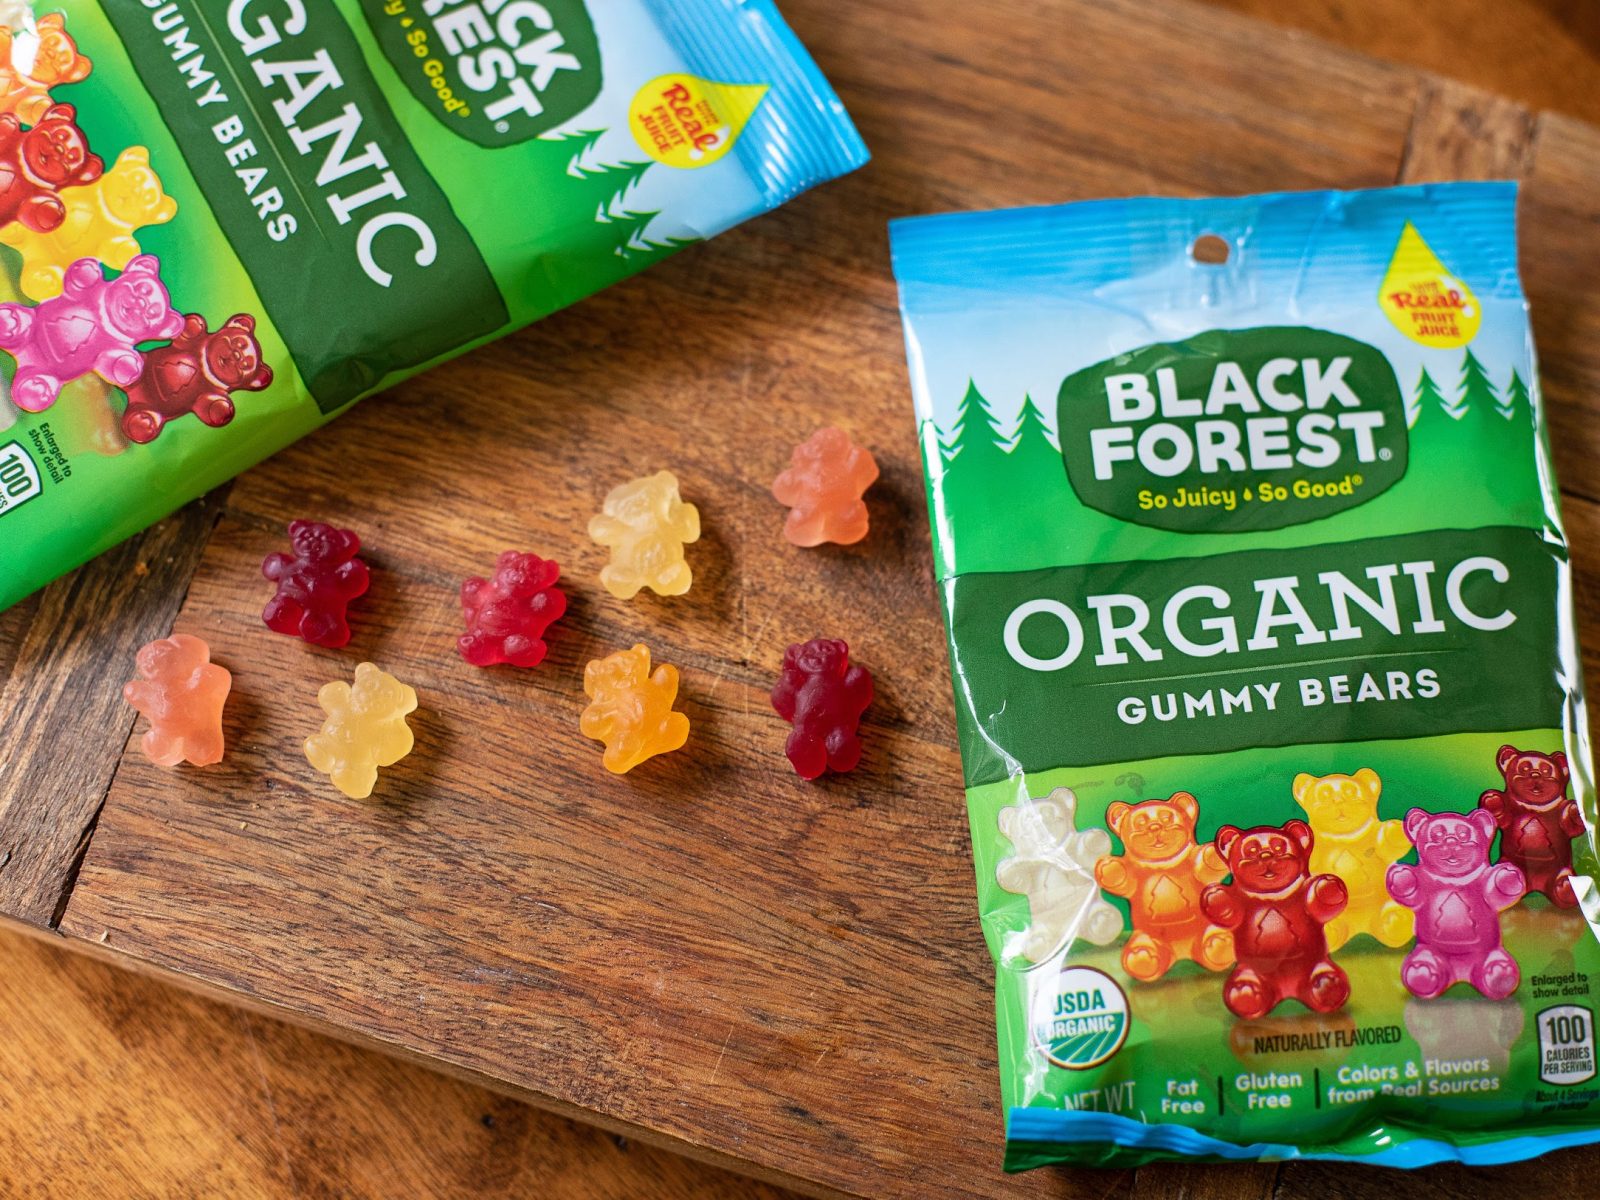 Black Forest Organic Gummies As Low As 75¢ At Publix on I Heart Publix 1